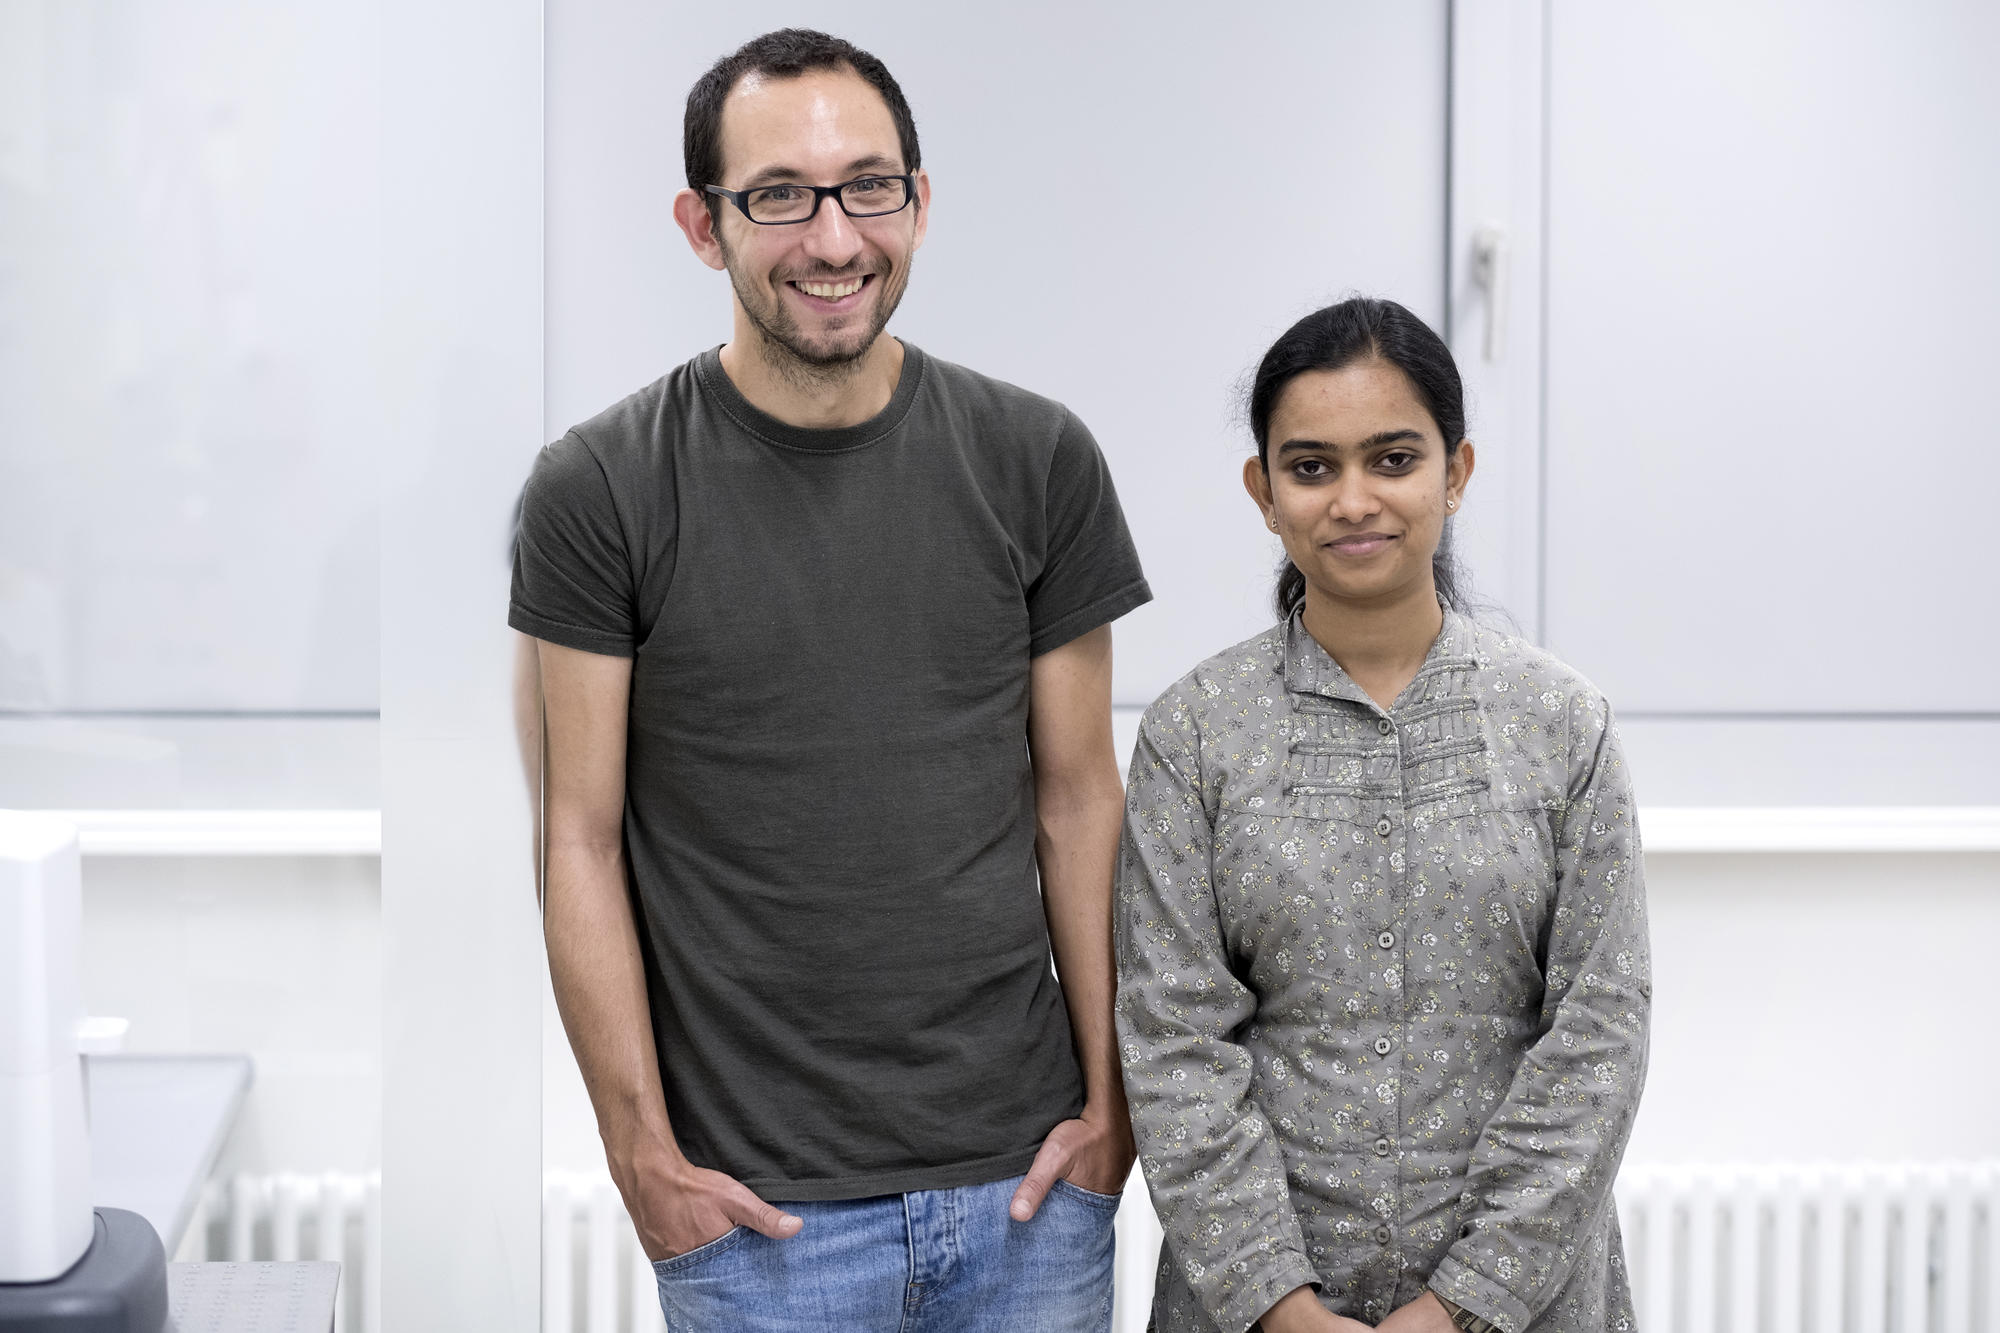 The School of Analytical Sciences Adlershof drew doctoral candidates Yesudas and Rodriguez with its combination of state-of-the-art equipment, interdisciplinarity, and diversity of ongoing projects.